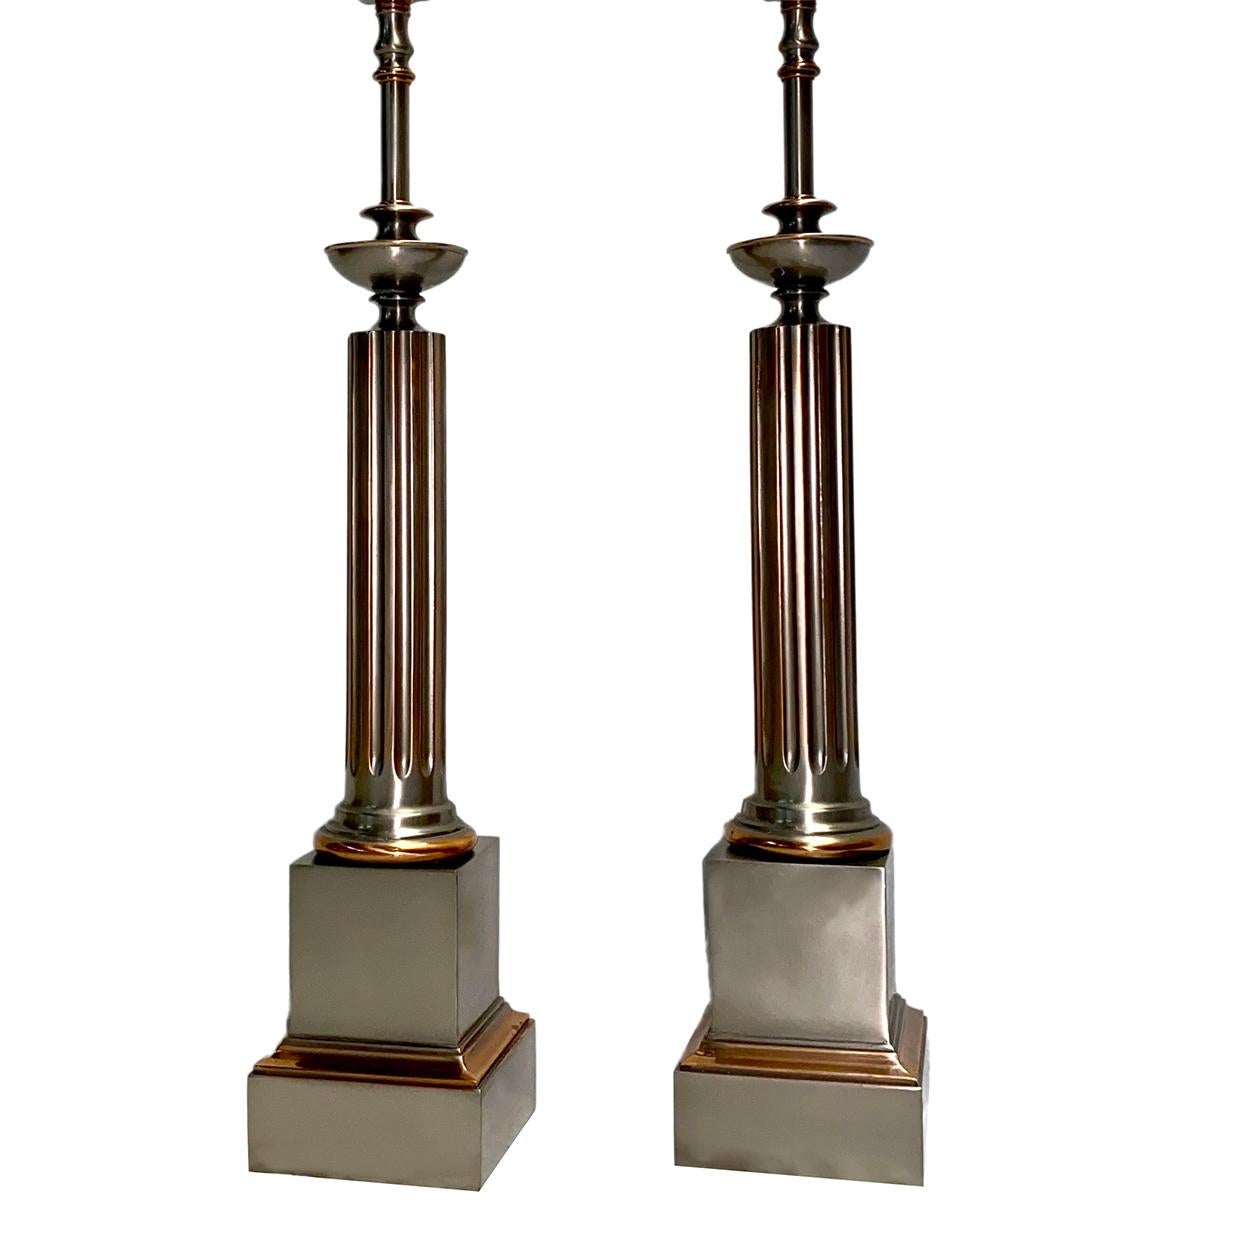 A pair of circa 1930's French neoclassic column table lamps with original pewter and copper patina.

Measurements:
Height of body: 24